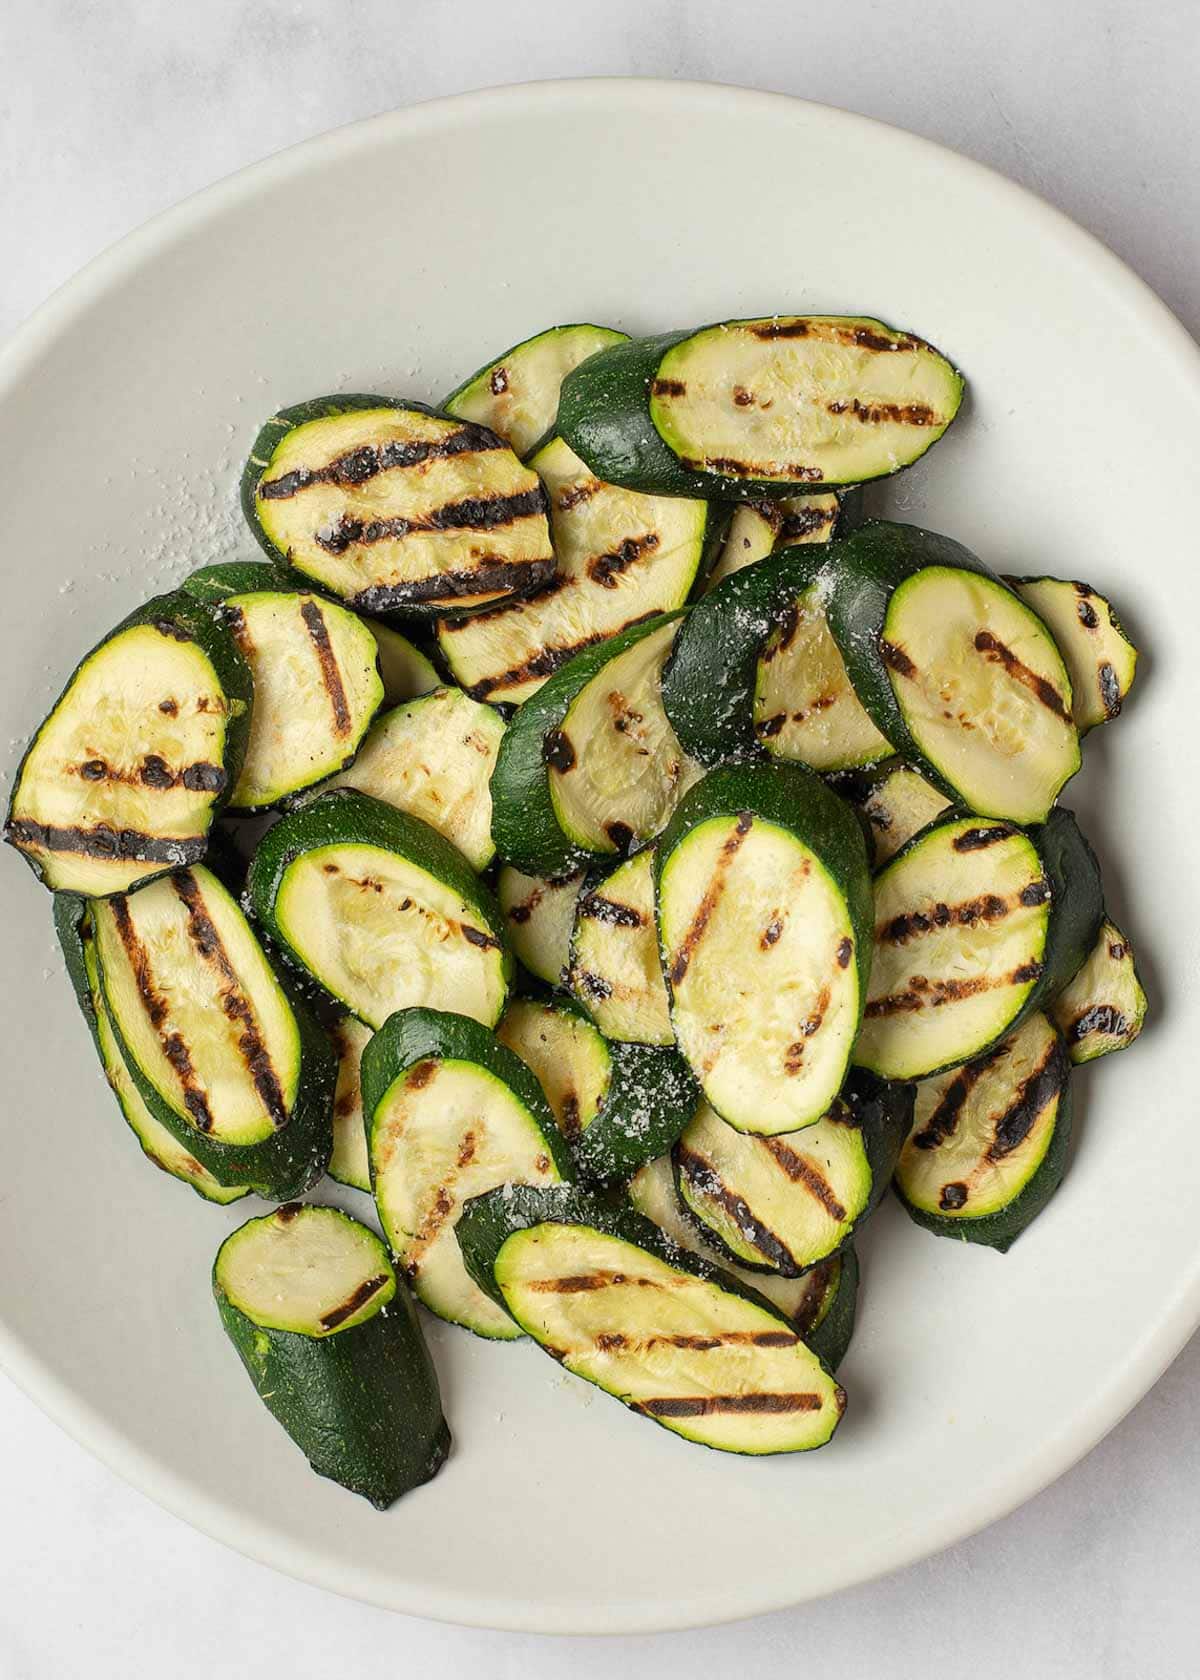 This Grilled Zucchini Salad with a homemade red wine vinaigrette will be your repeat meal of the summer! This healthy recipe is ready in under 30 minutes, loaded with fresh mozzarella and tender veggies, and has fewer than 5 net carbs.